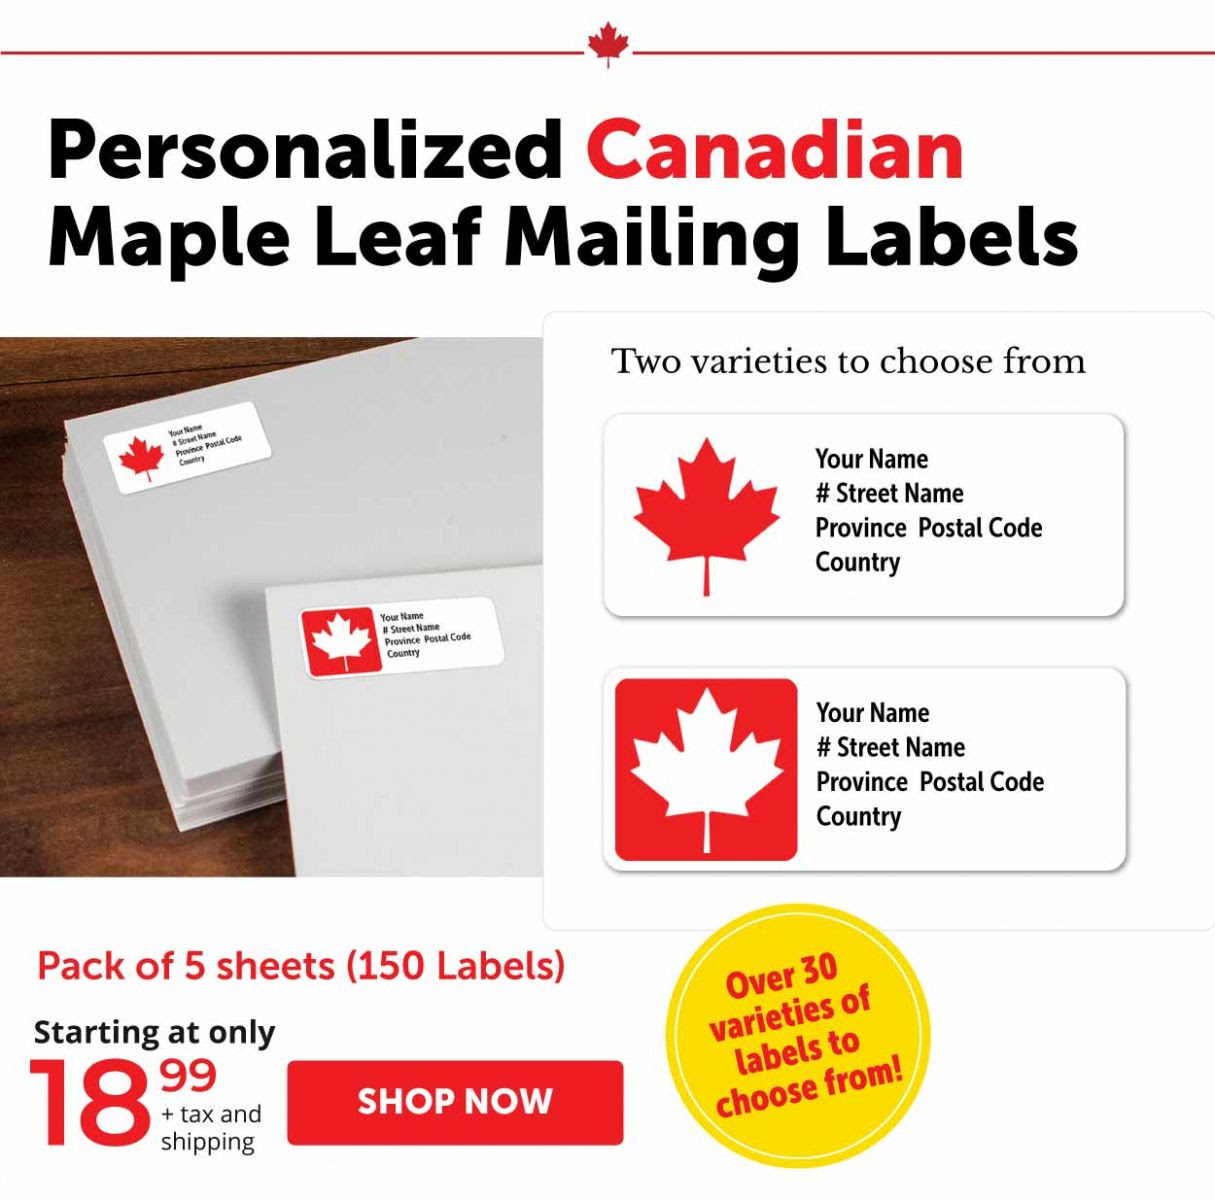 Personalized Canadian Maple Leaf Mailing Labels